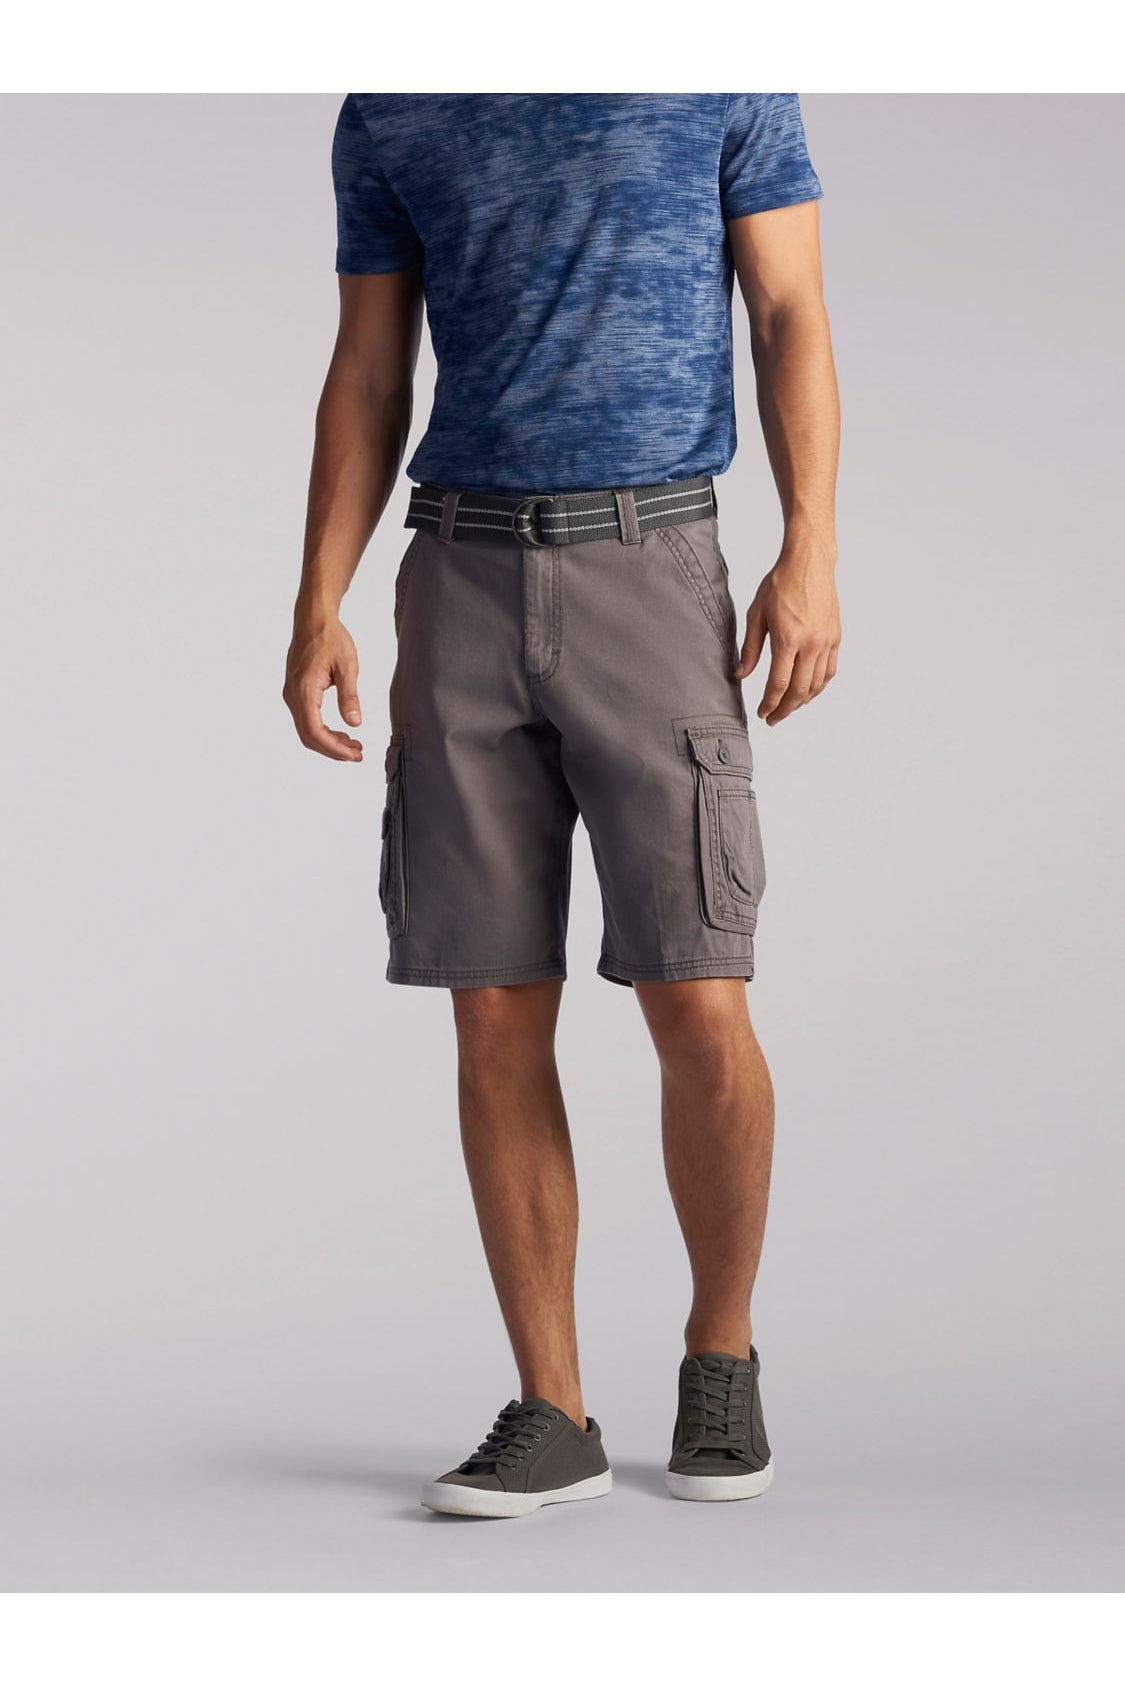 Big and Tall Wyoming Cargo Short in Vapor from Front View